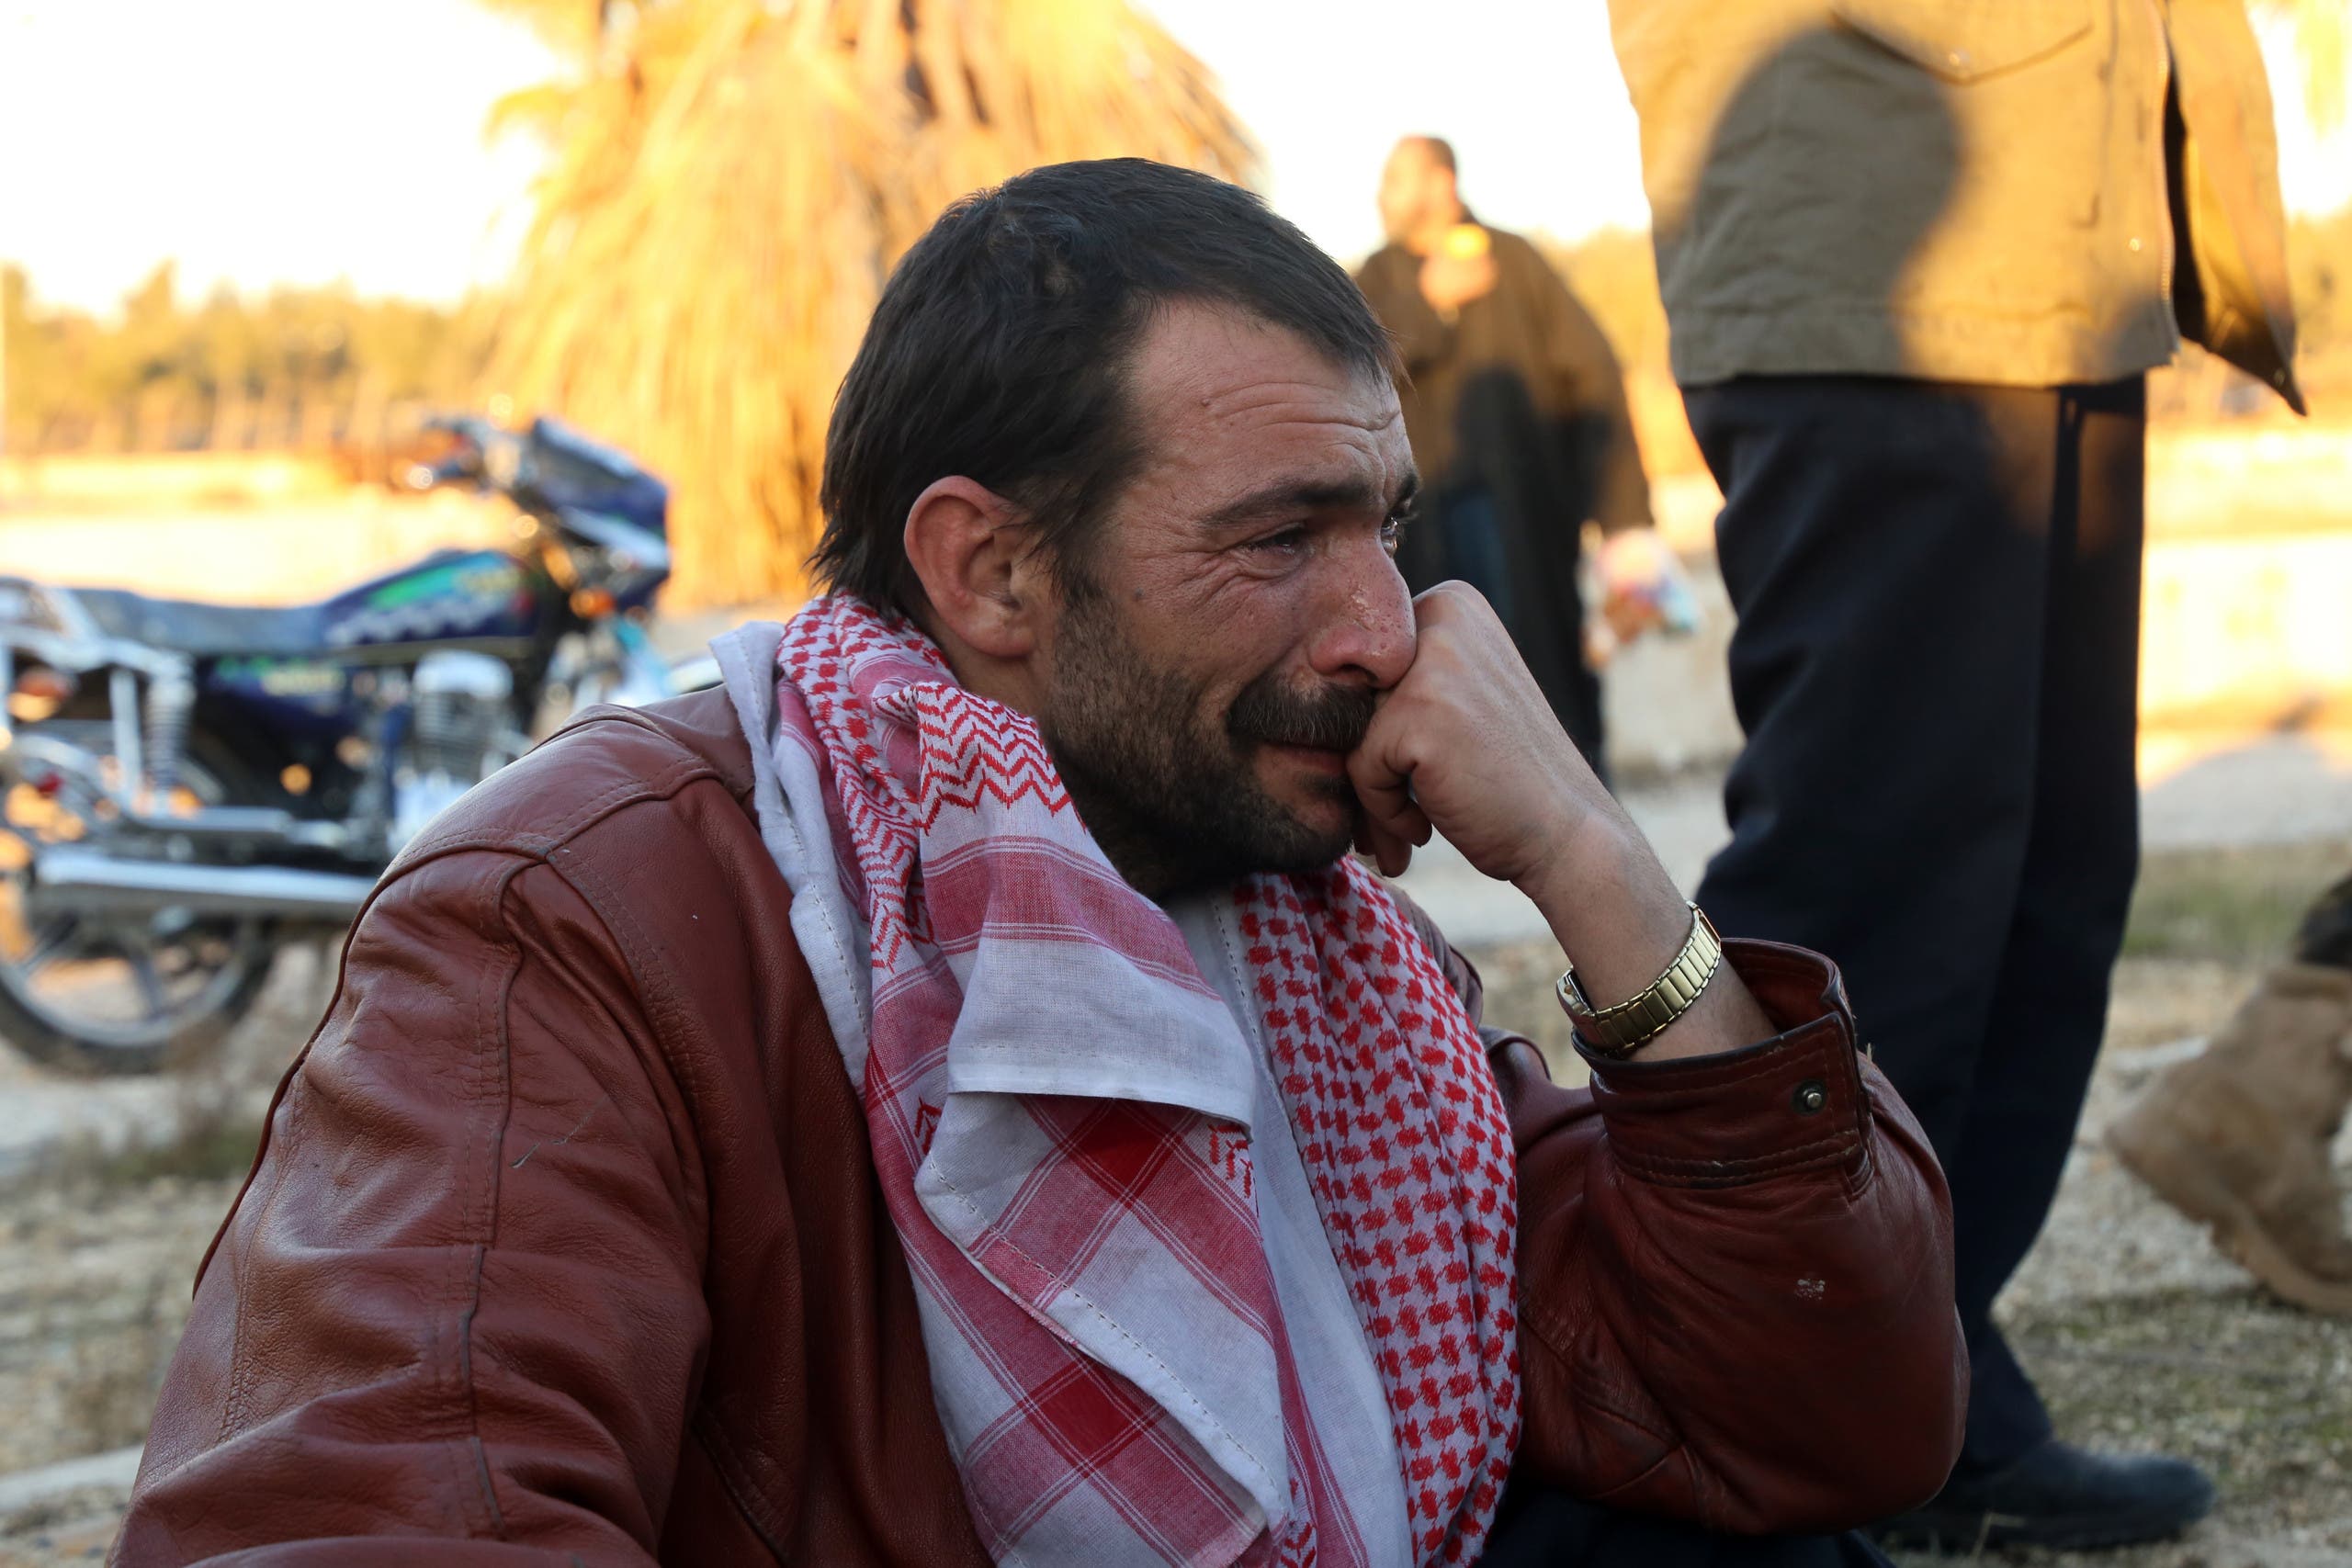 A Syrian man, who was evacuated from rebel-held neighbourhoods in the embattled city of Aleppo, cries upon his arrival in the opposition-controlled Khan al-Aassal region, west of the city, on December 15, 2016, the first stop on their trip, where humanitarian groups will transport the civilians to temporary camps on the outskirts of Idlib and the wounded to field hospitals. Hundreds of civilians and rebels left Aleppo under an evacuation deal that will allow Syria's regime to take full control of the city after years of fighting. Baraa Al-Halabi / AFP